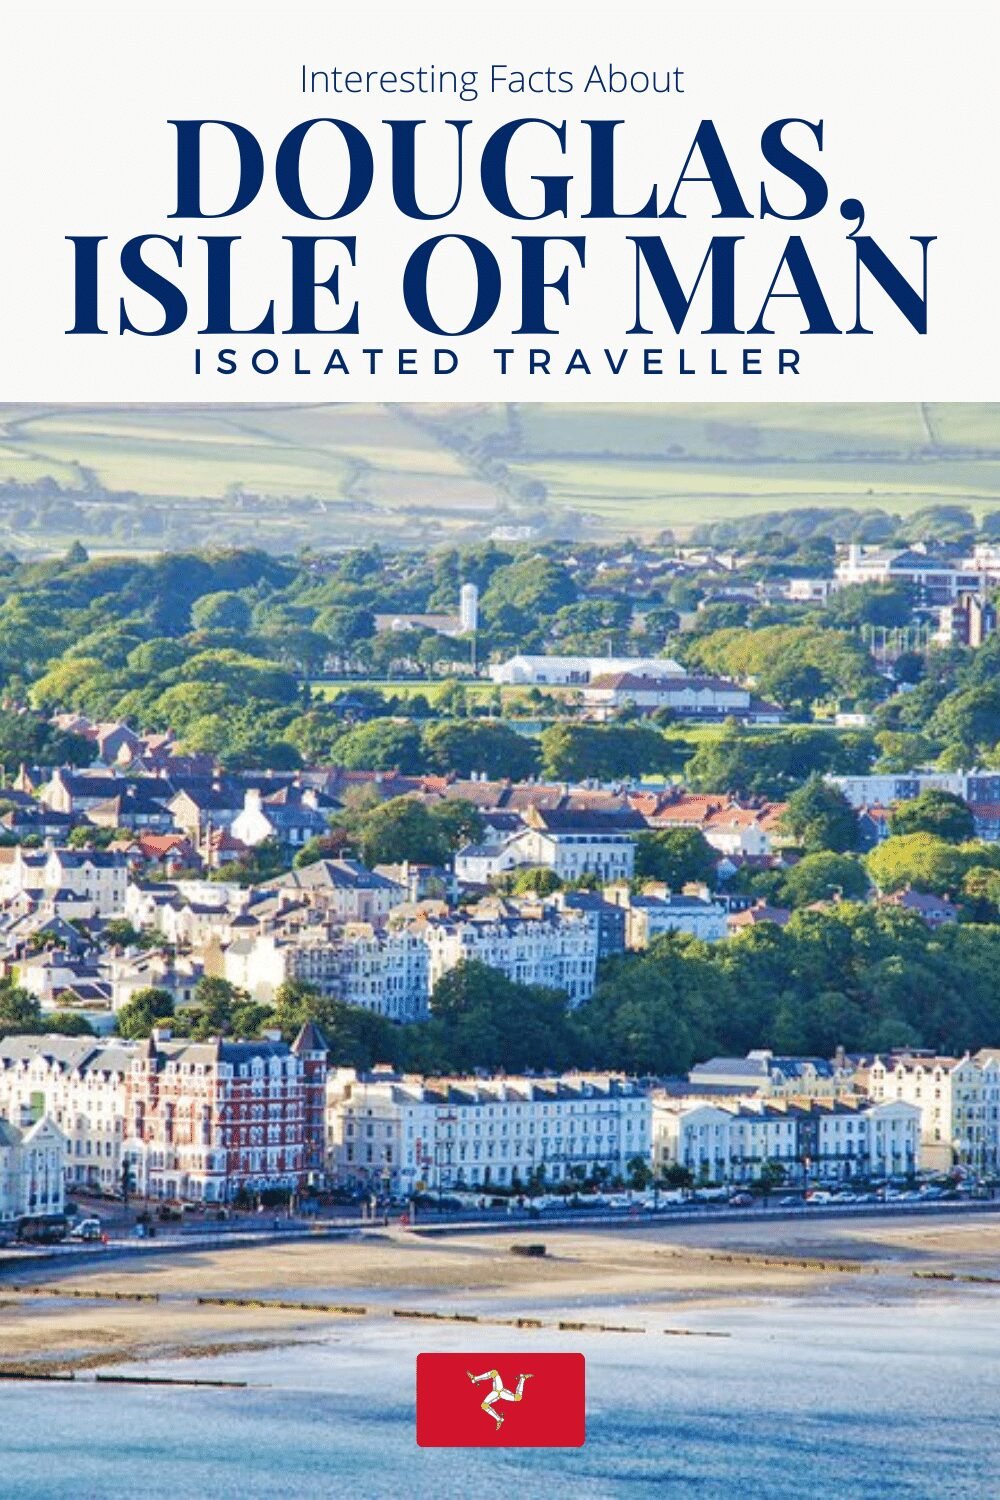 Interesting Facts About Douglas, Isle of Man